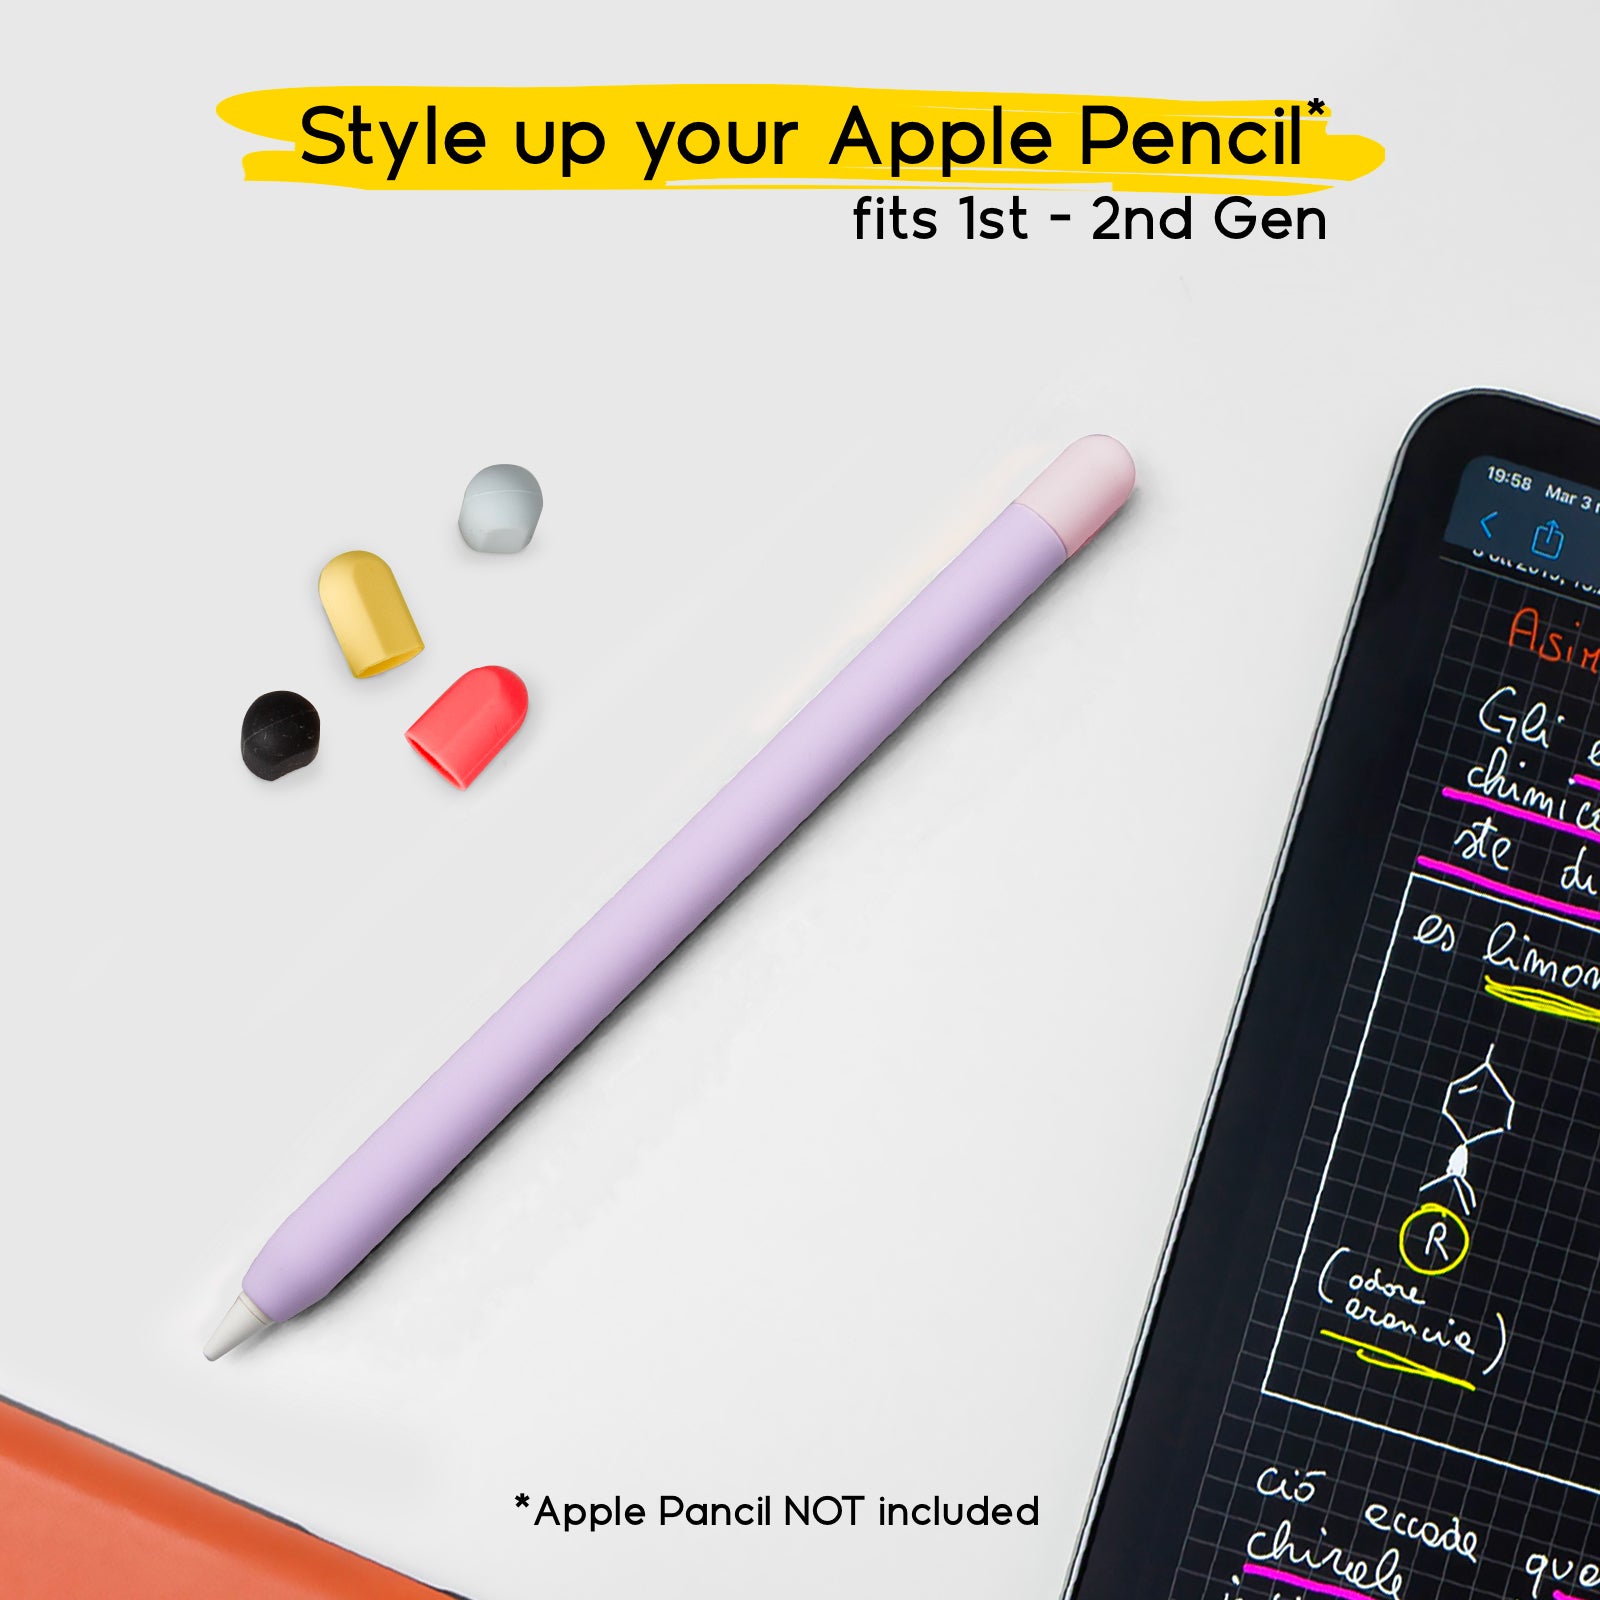 Lilac skin case for Apple Pencil Pro/1st Gen./2nd Gen. Apple Pencils with 5 colourful caps